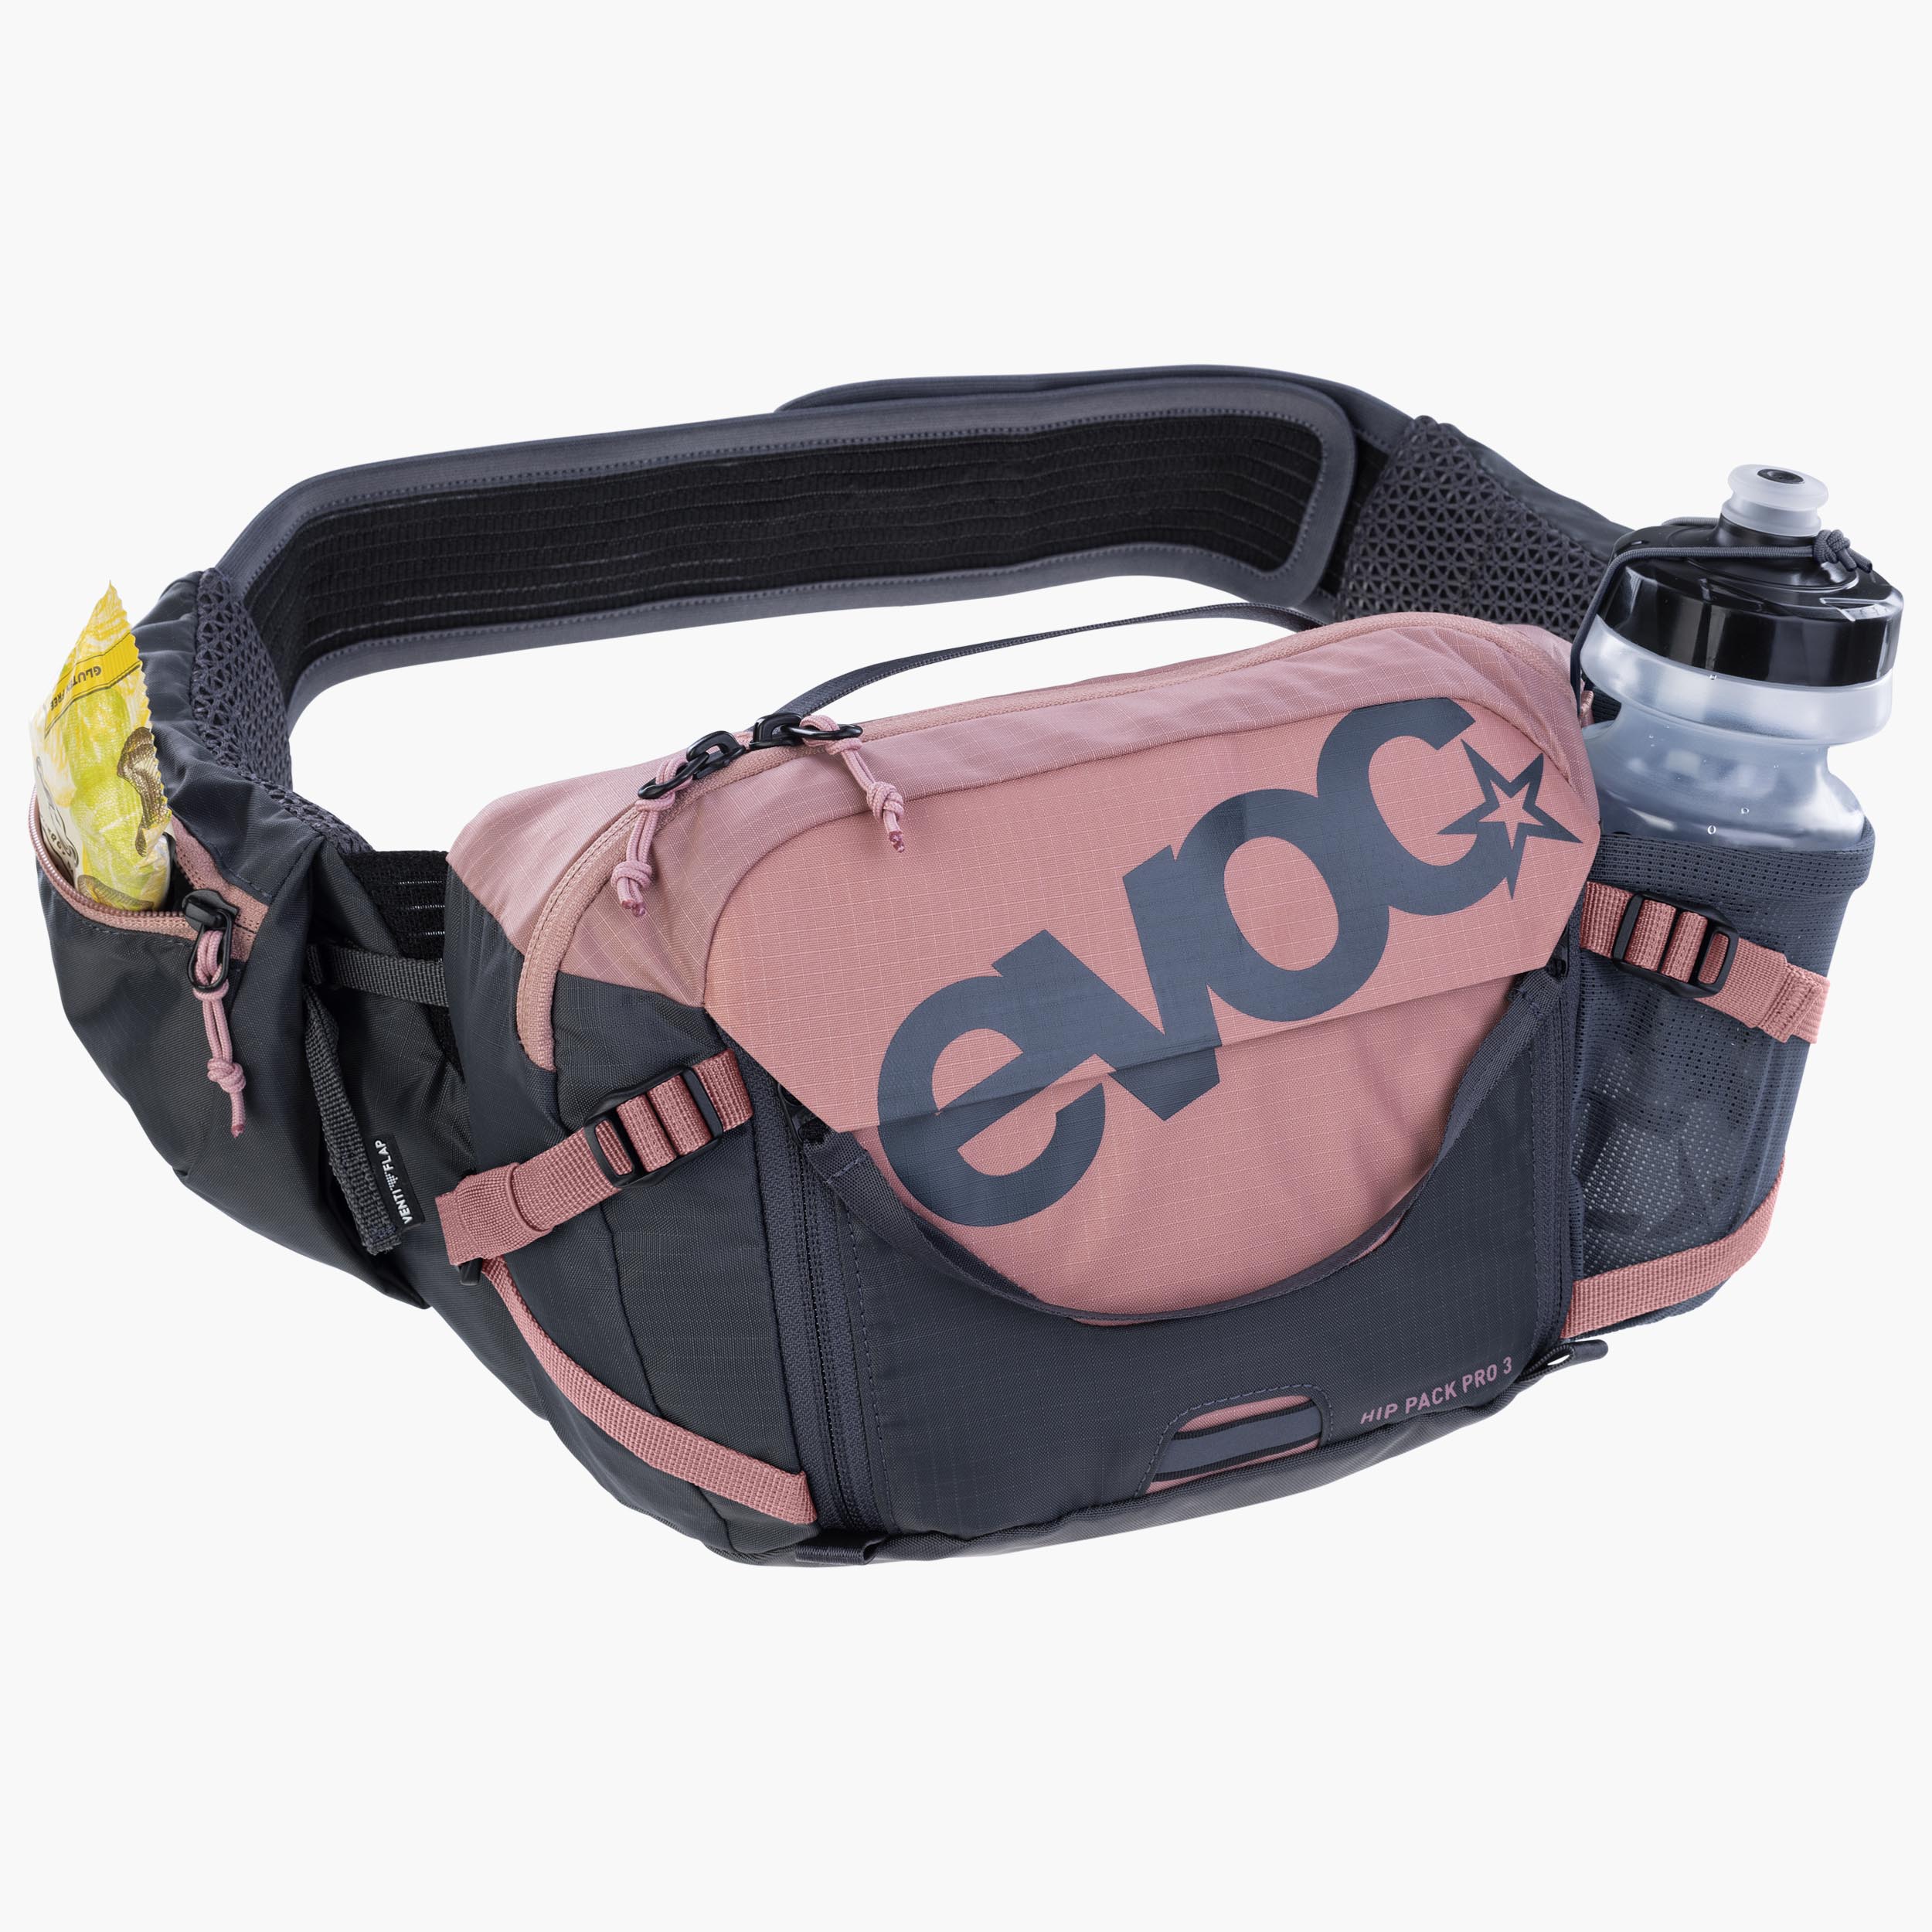 5L Hip Bag with 1.5L Hydration Bladder - Fanny Pack with Stretchable Waist  Strap, Water Bottle Holder Compartment, Large Side Pocket, Detachable